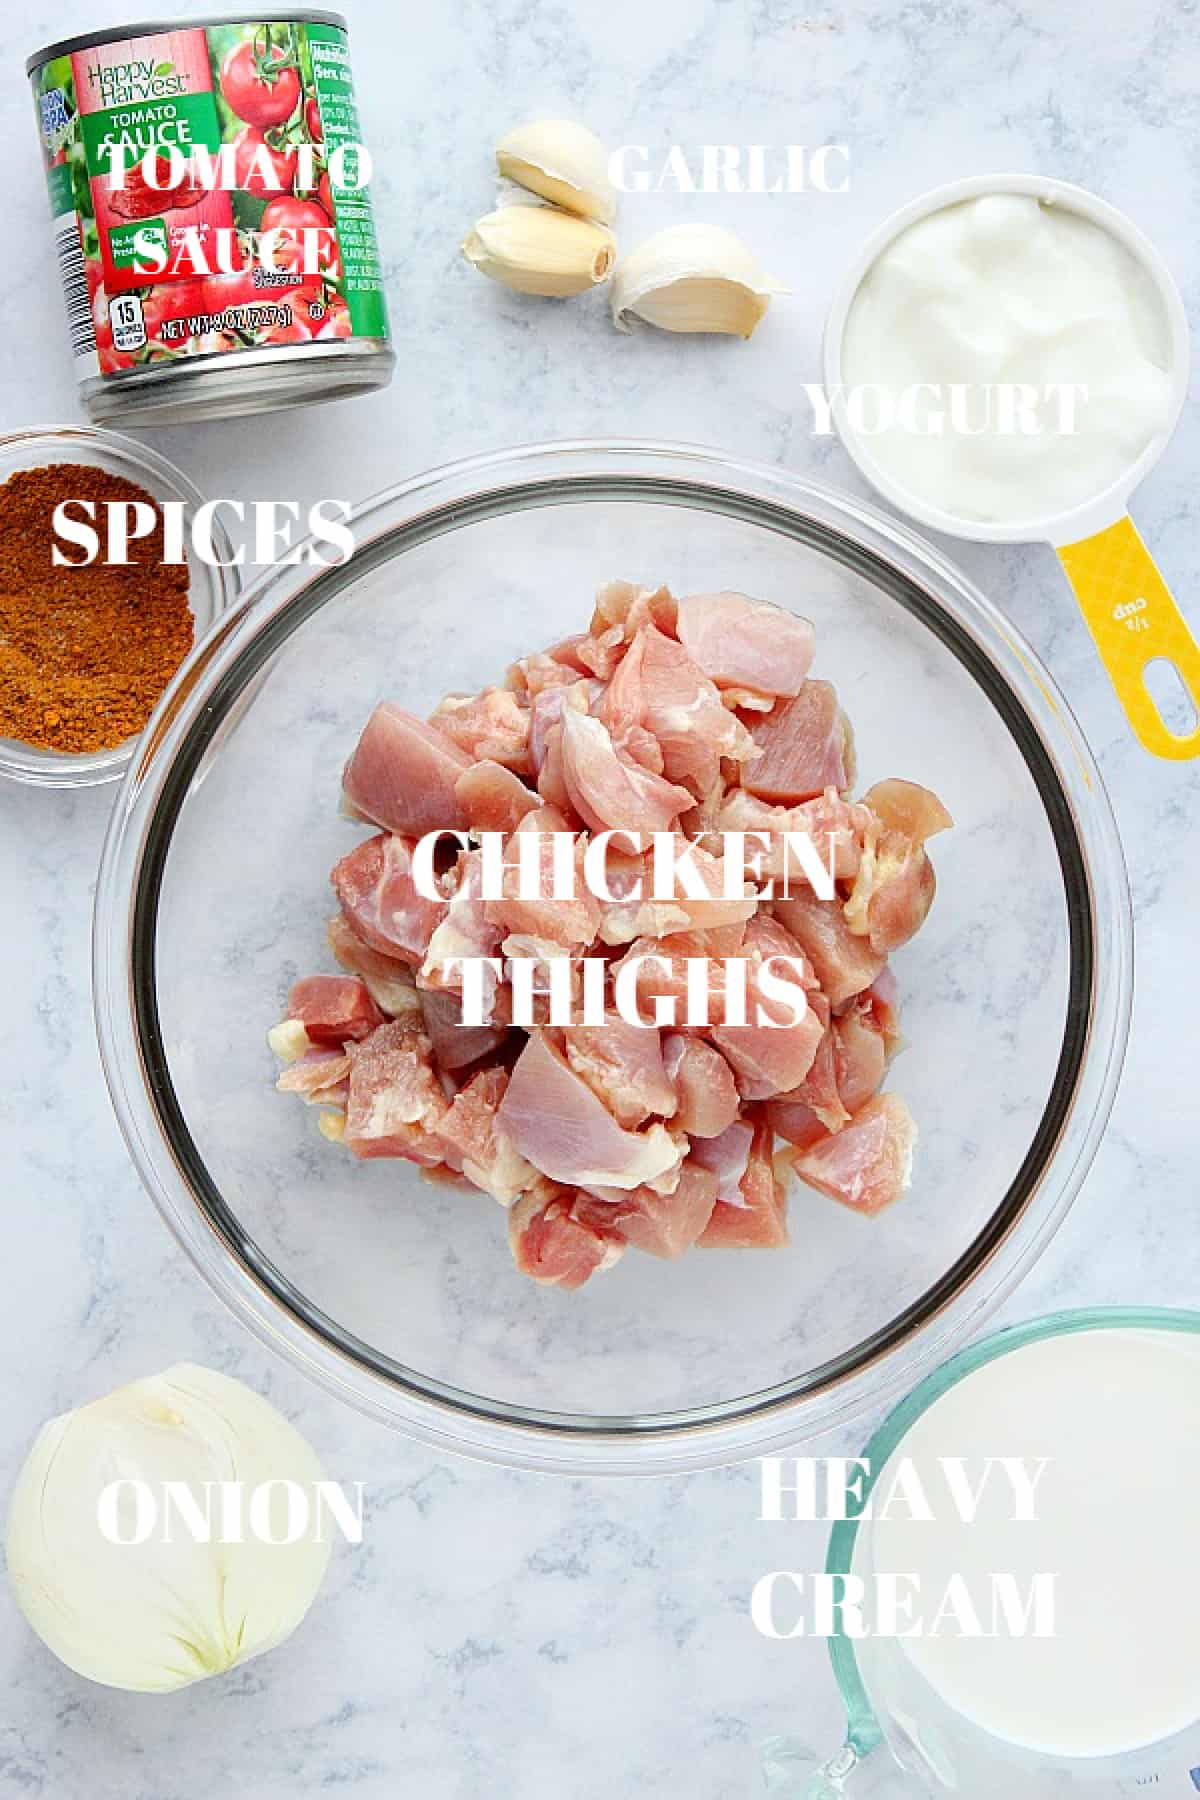 Chicken thighs pieces in glass bowl, onion, heavy cream, garlic, tomato sauce in a can, spices in a bowl and yogurt on a gray board.